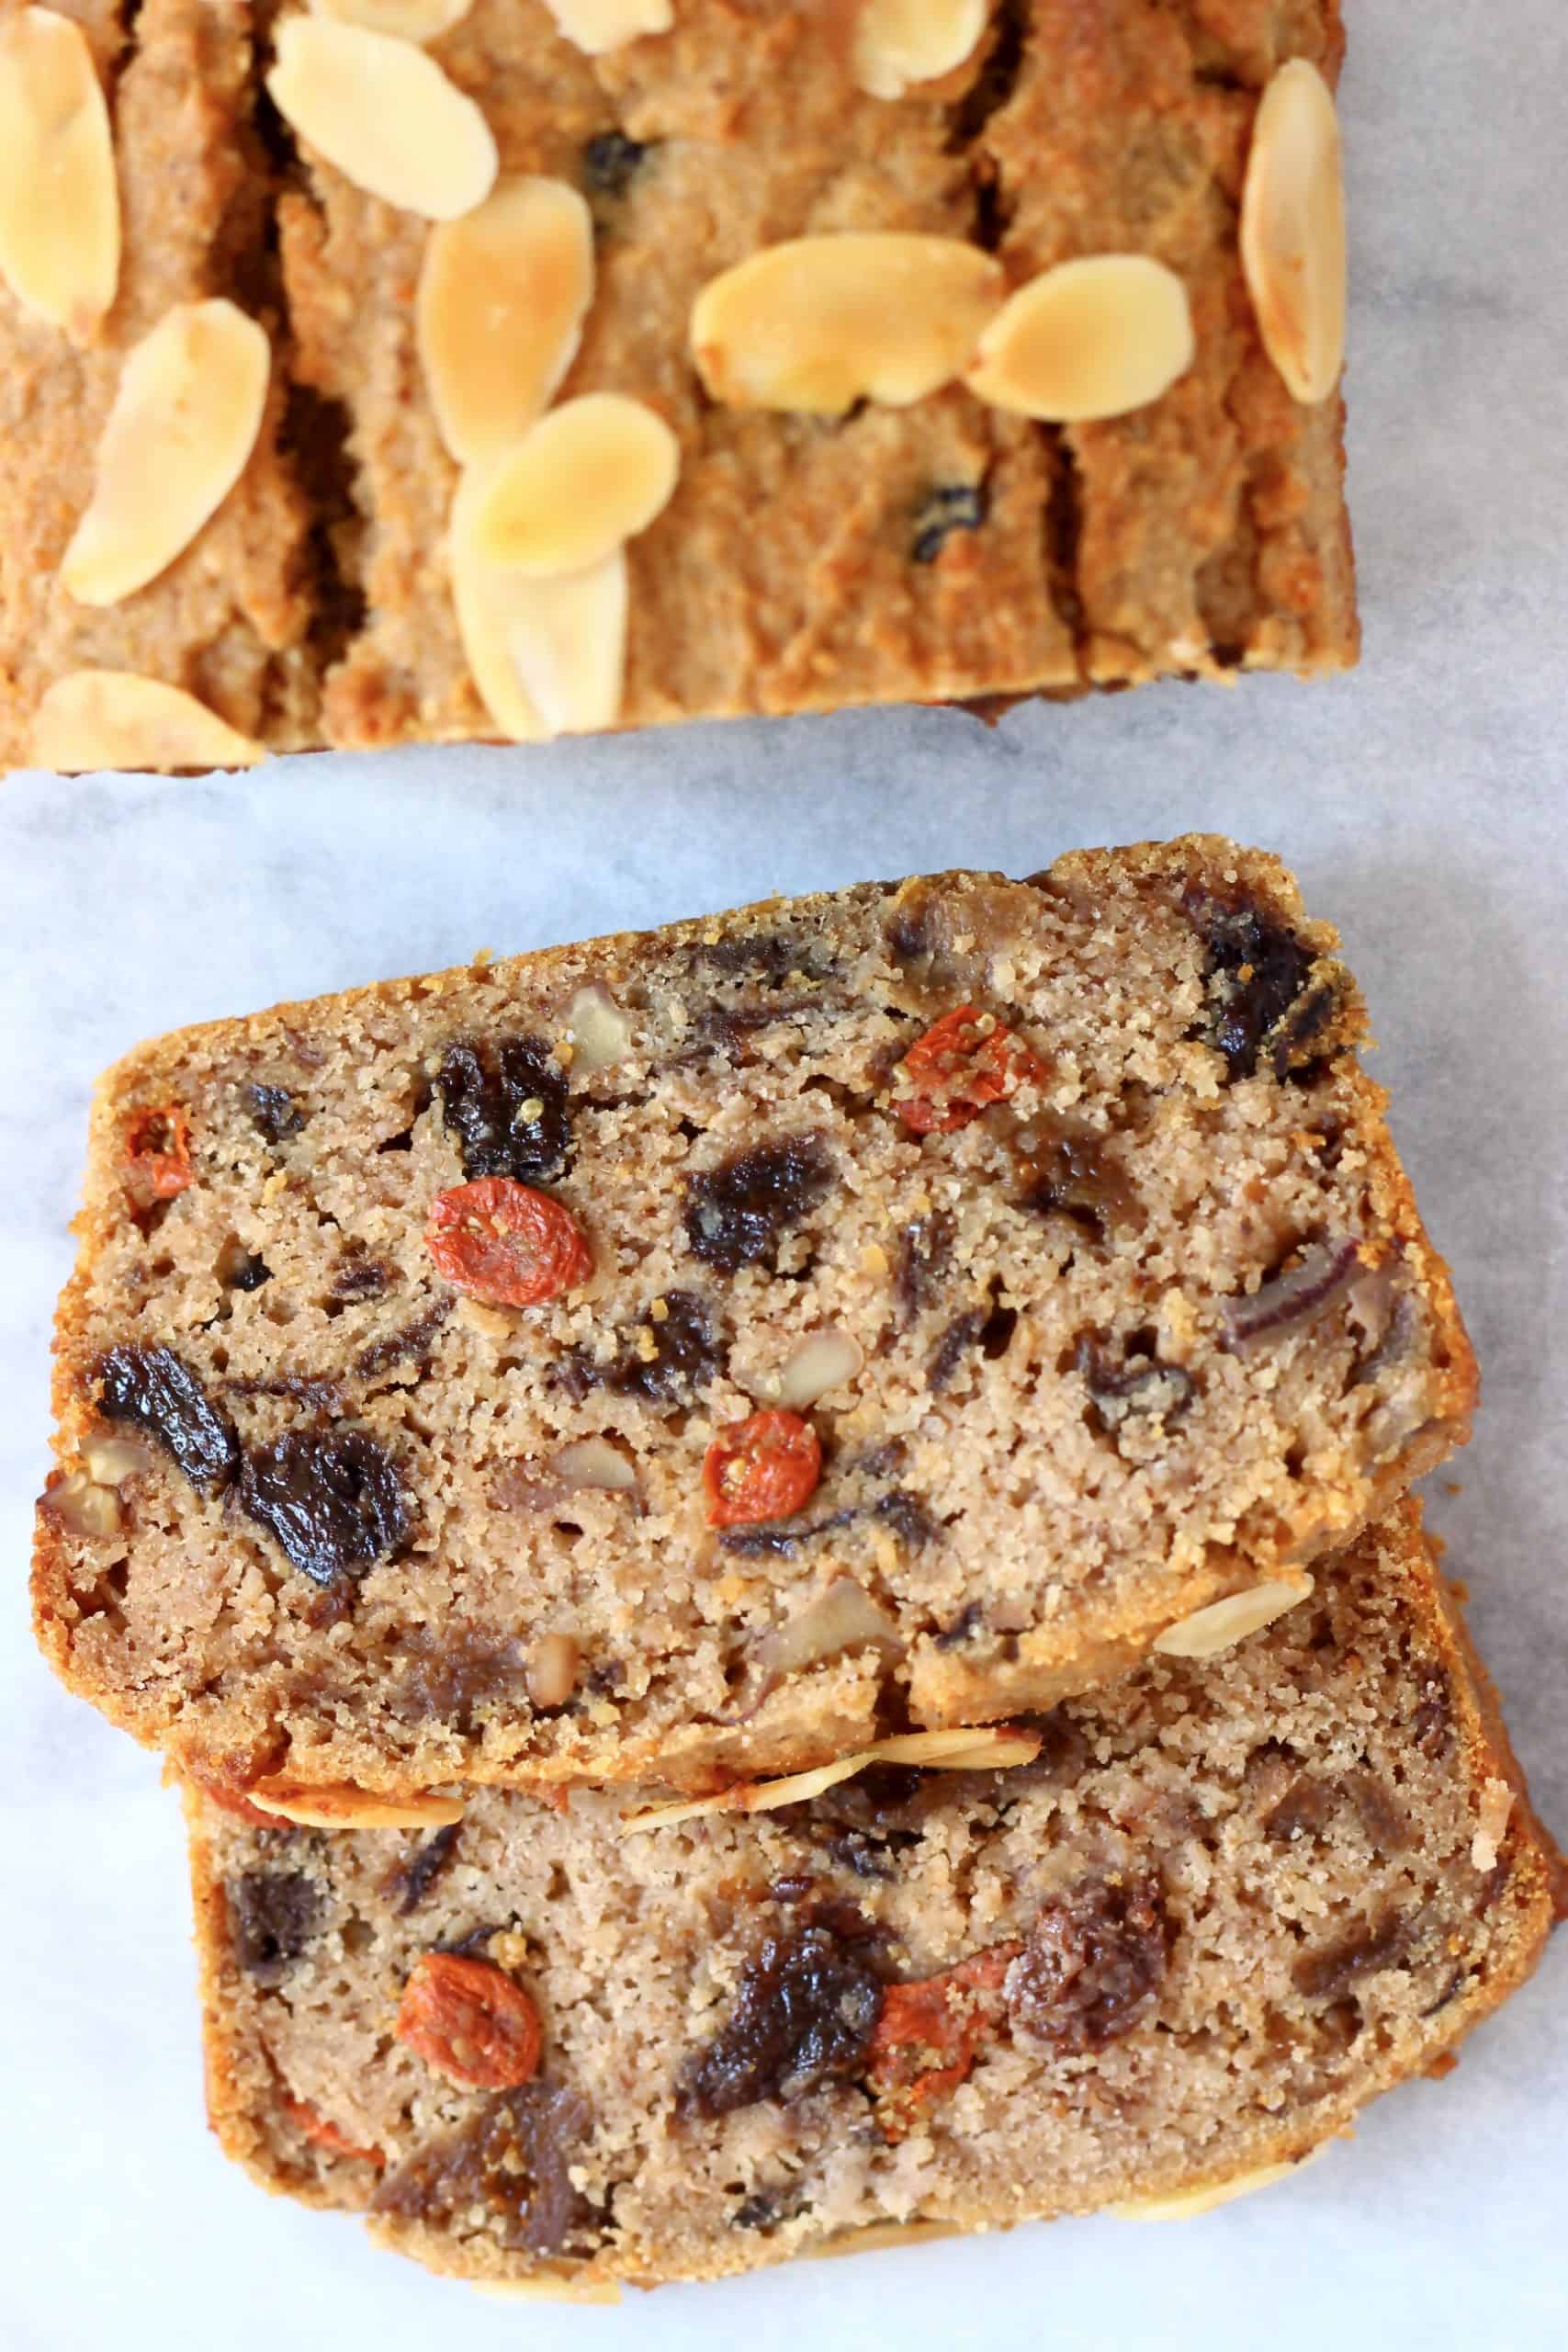 A gluten-free vegan fruit cake with two slices next to it